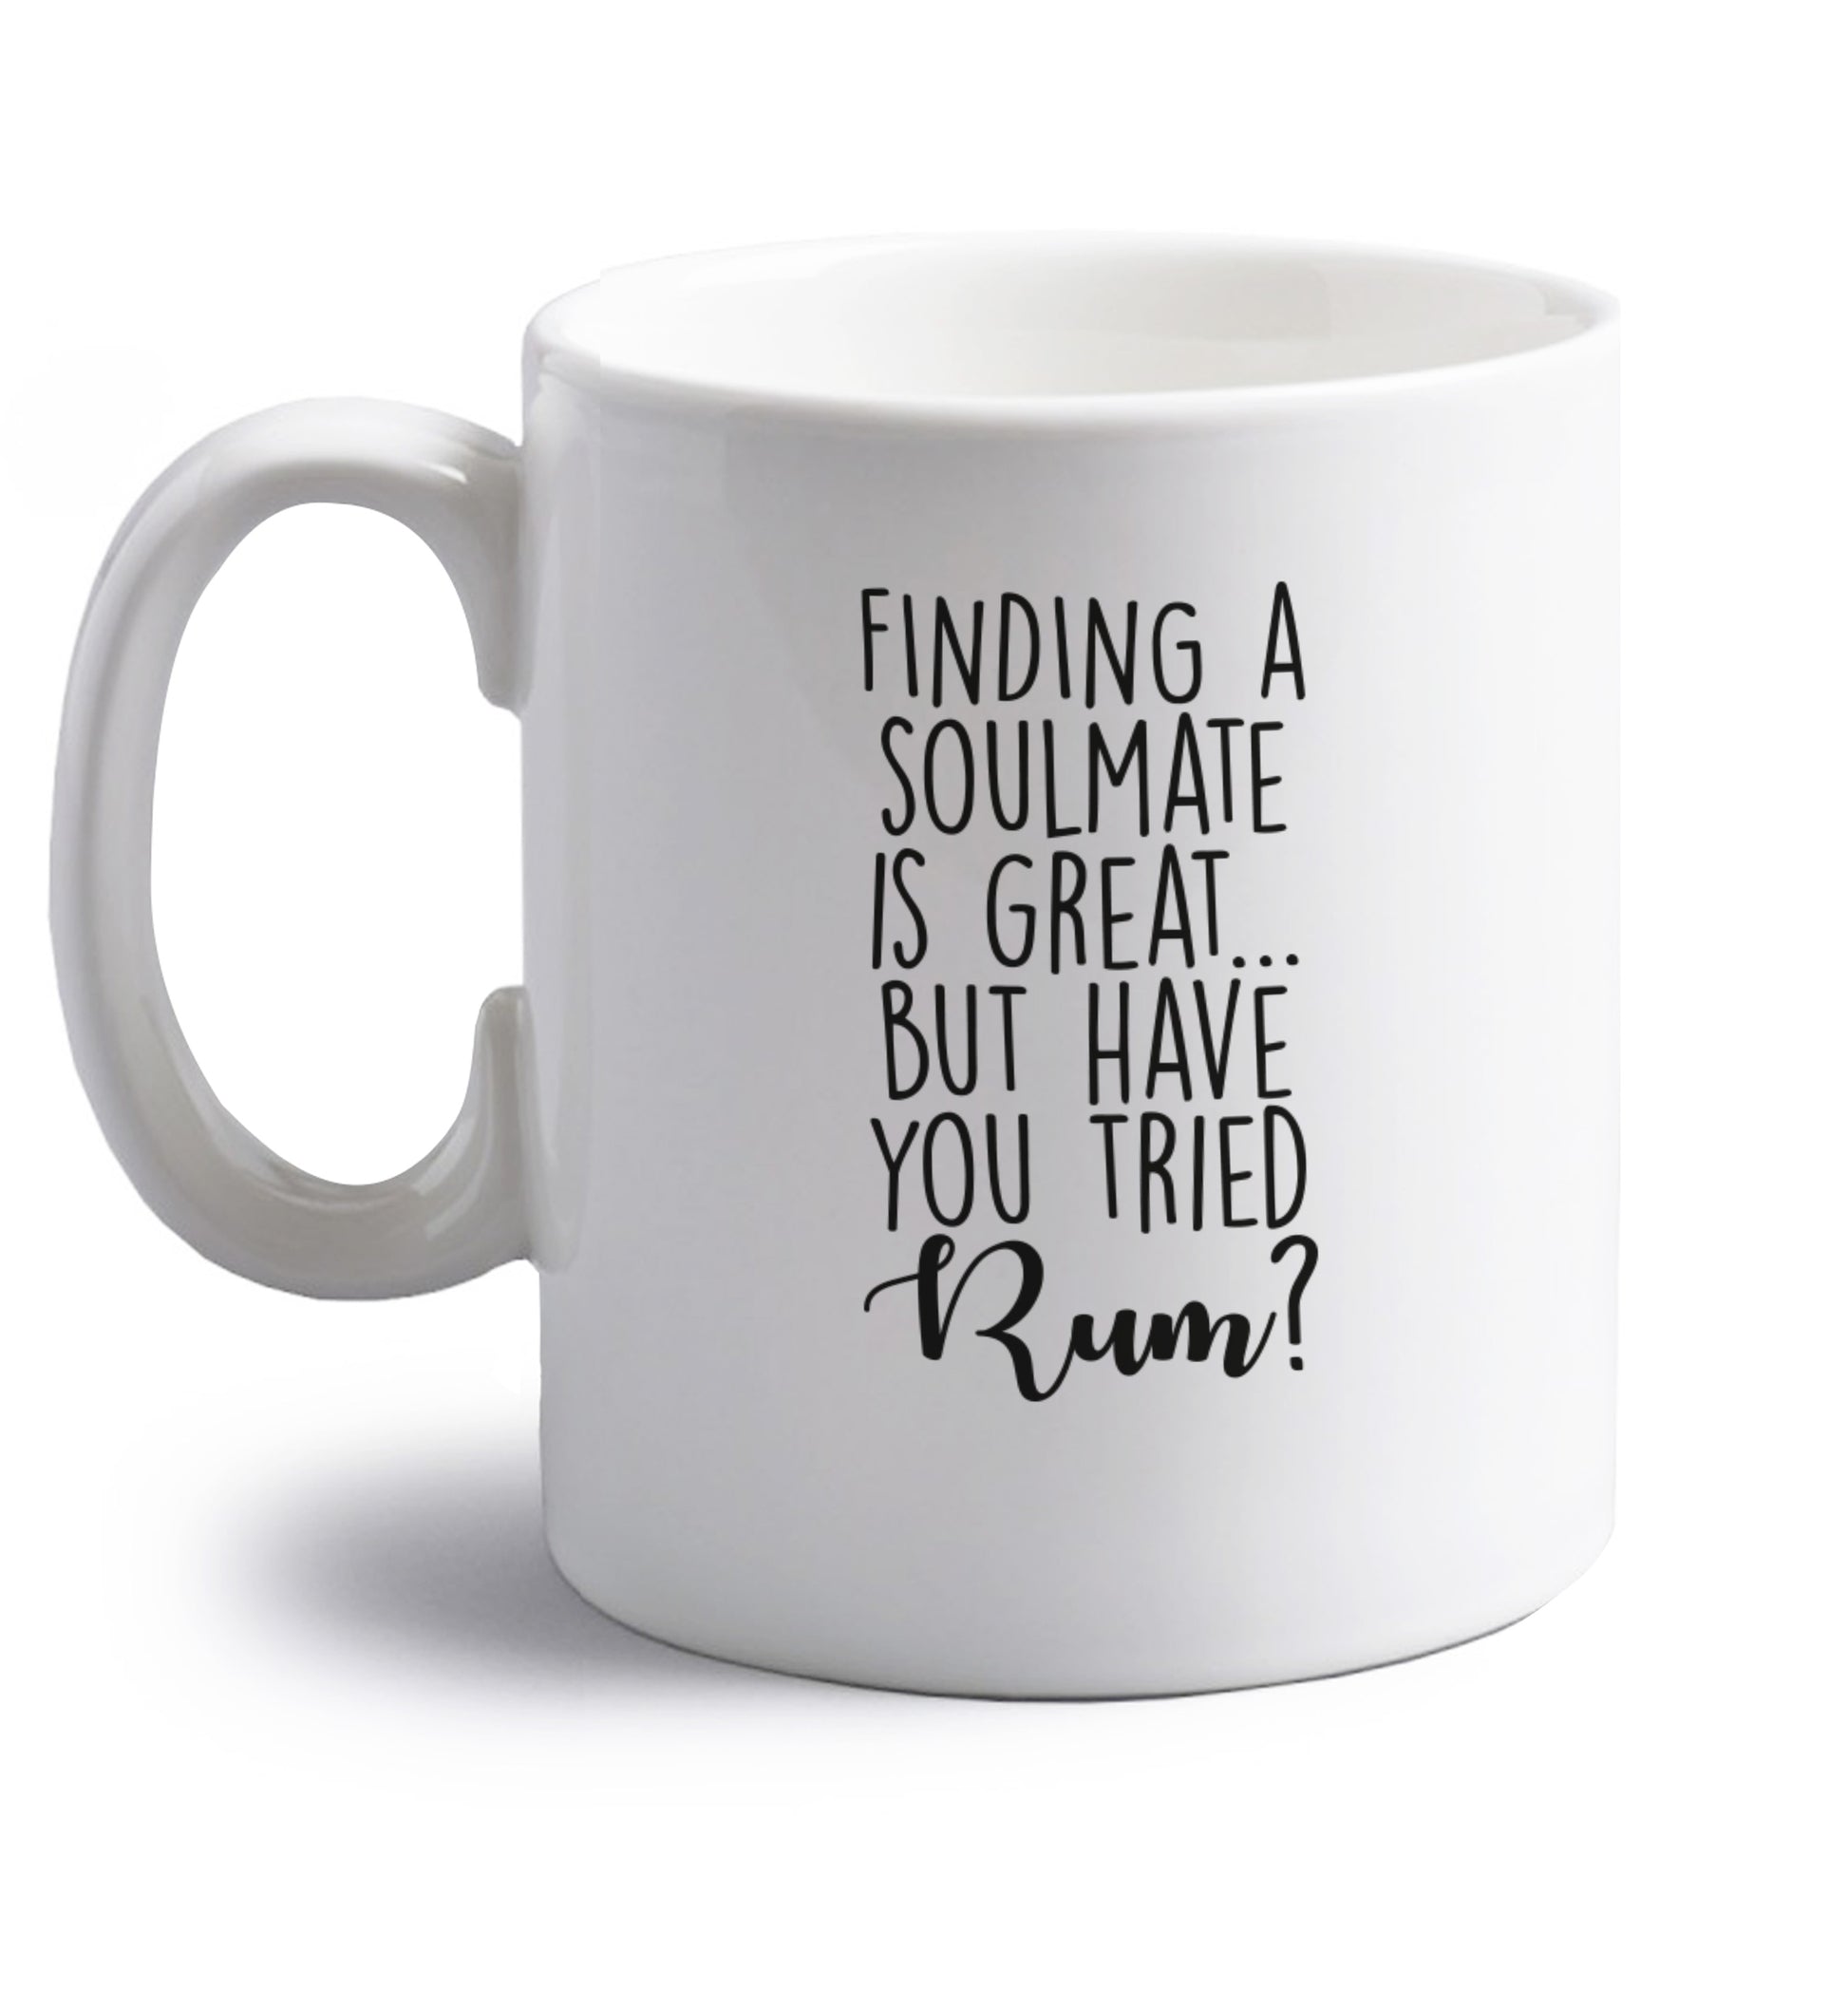 Finding a soulmate is great but have you tried rum? right handed white ceramic mug 